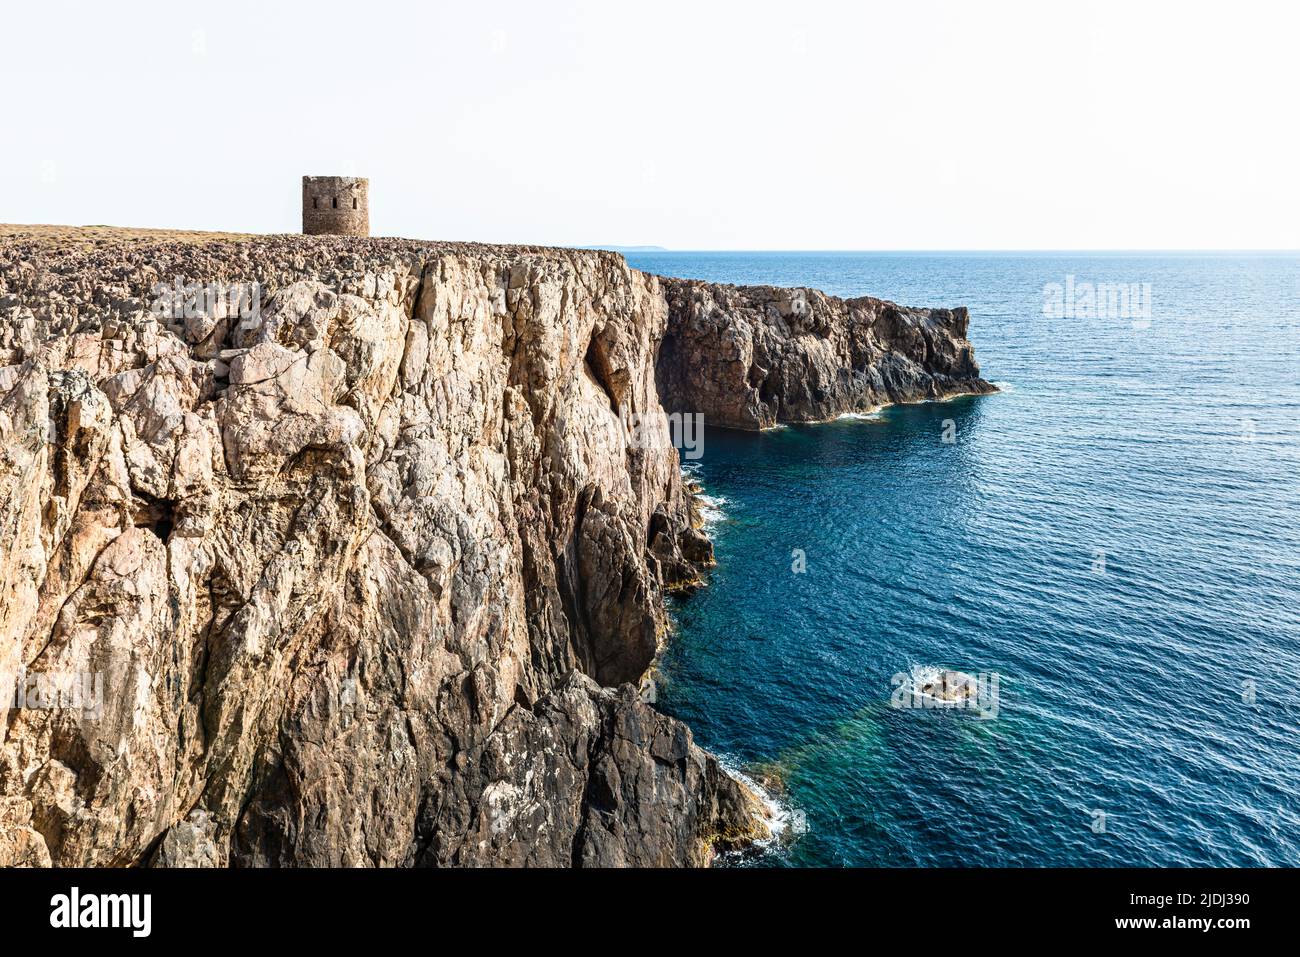 The derelict coastguard tower Torre Spagnola on the rugged karst rocks of the cliff at Cala Domestica, Iglesiente, Sardinia, Italy Stock Photo